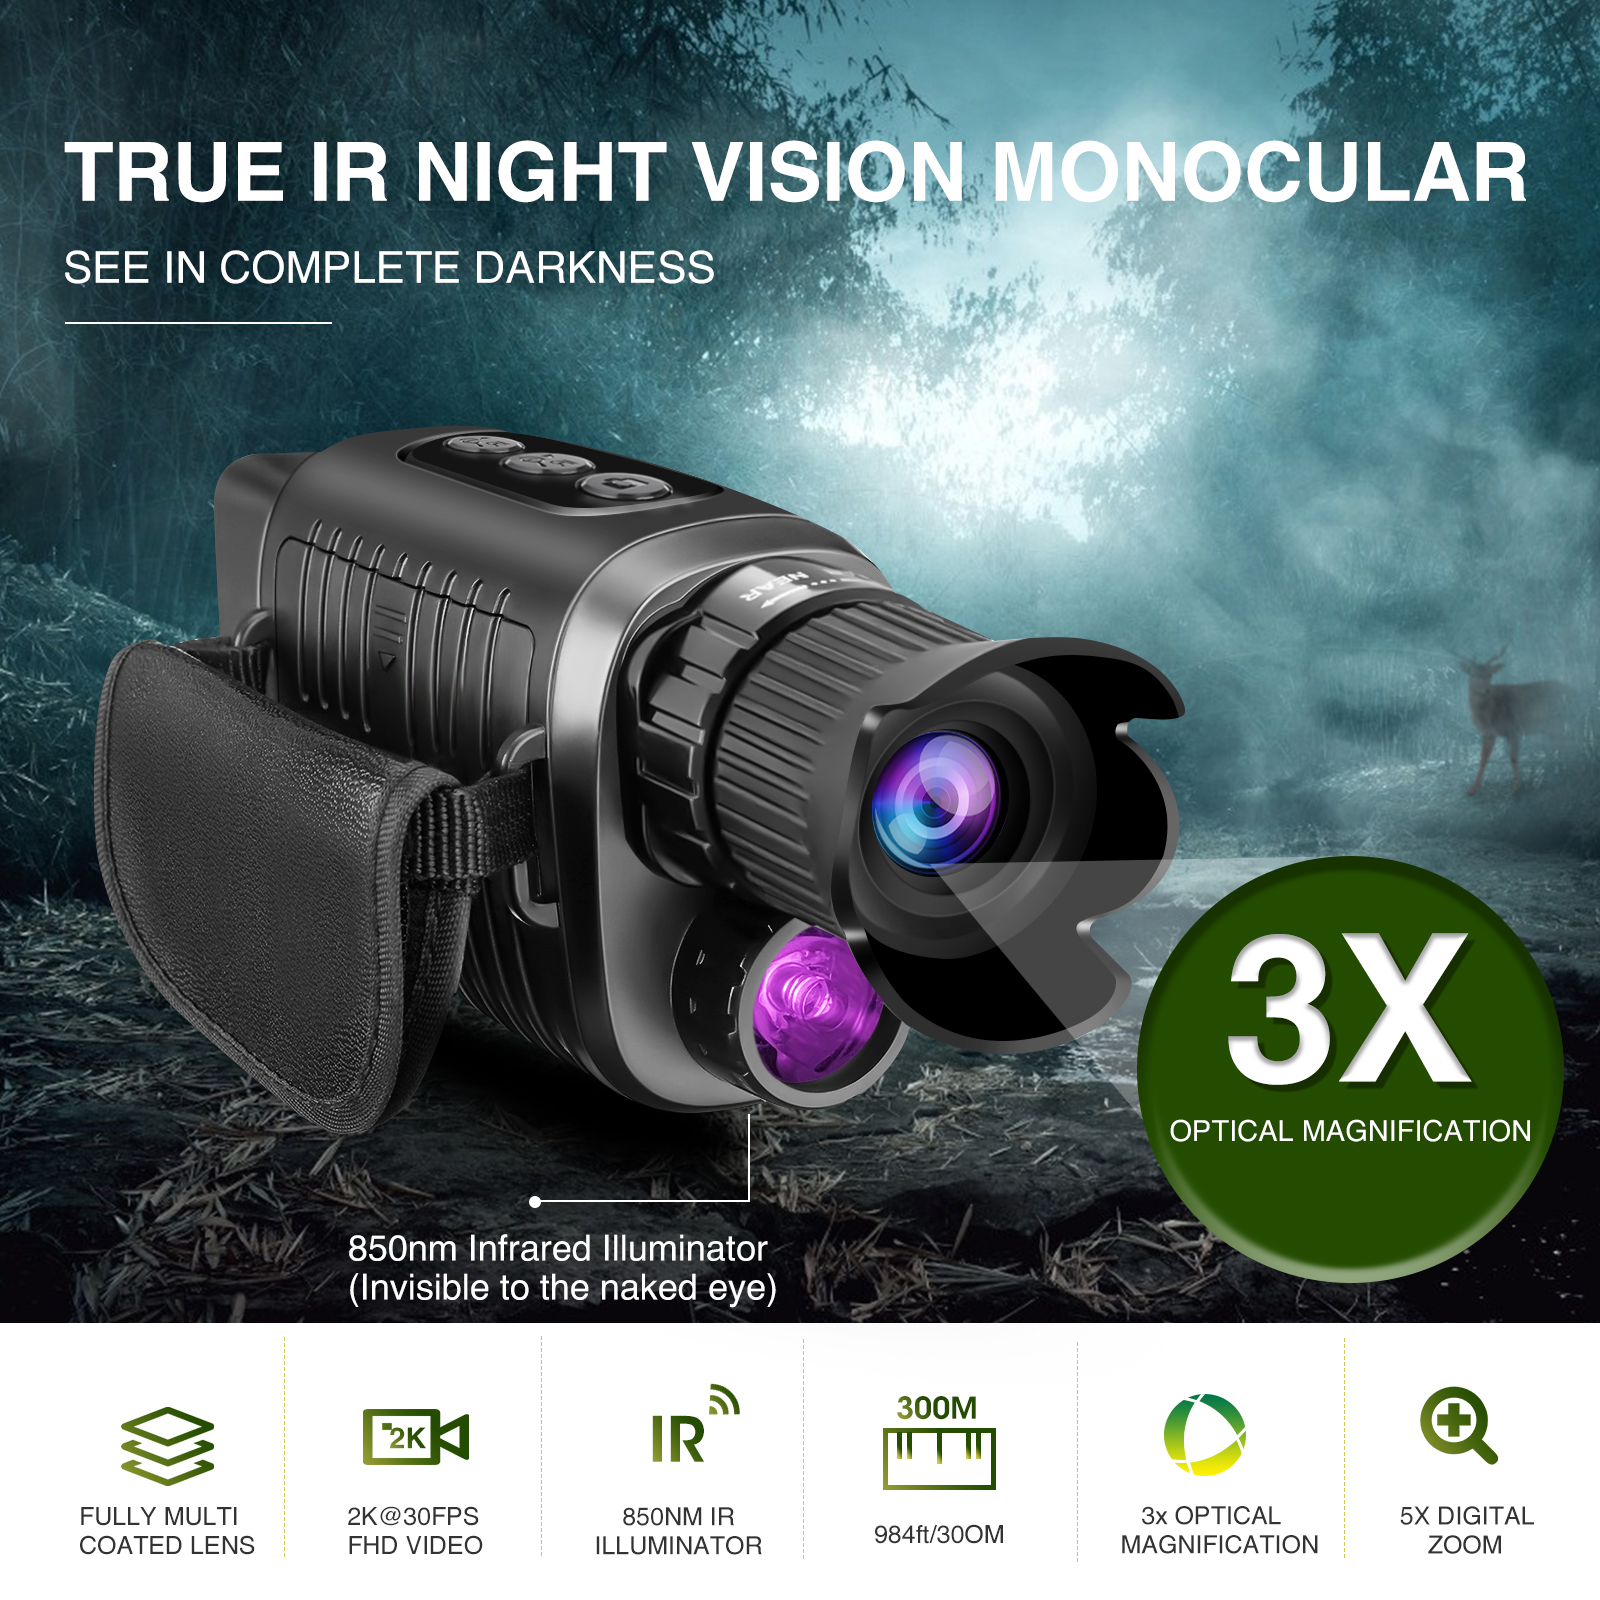 2K HD 5X Digital Zoom 850mm IR Night Vision Video Camcorder 1.5 inch HD LCD Display Vlogging Camera for YouTube with 32G Memory Card